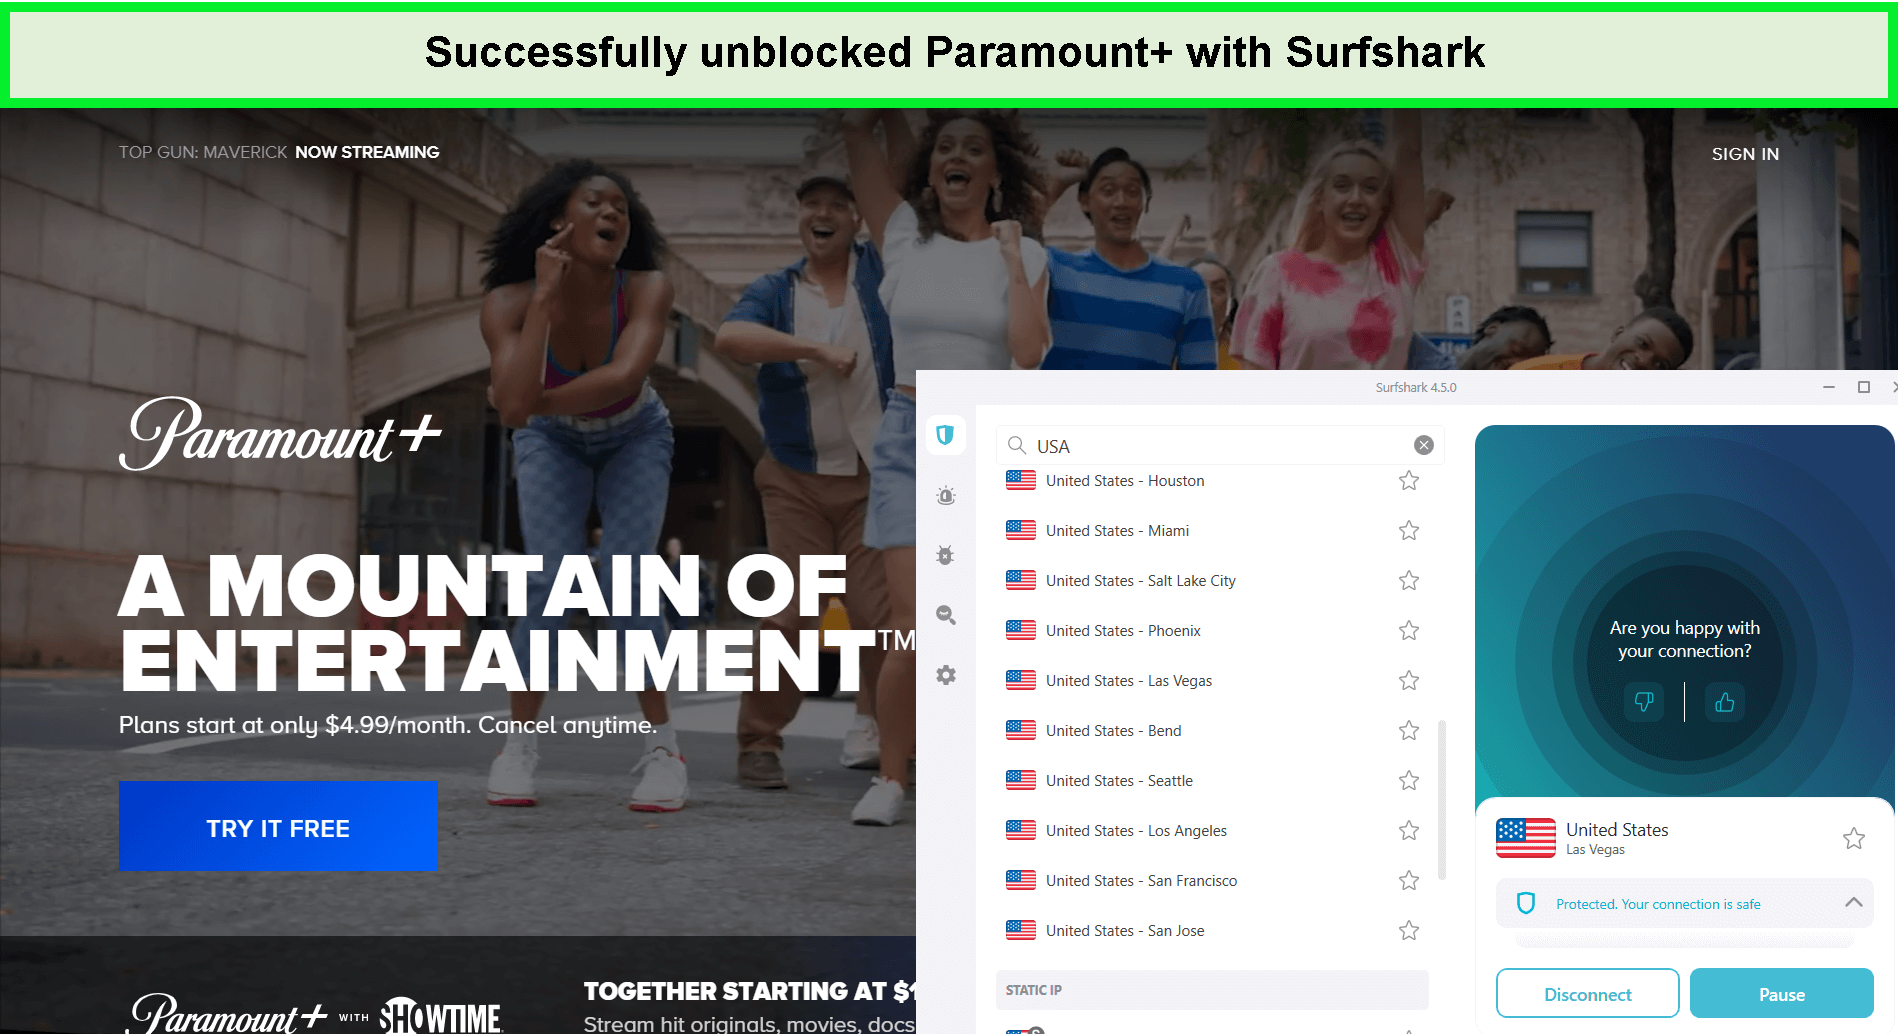 uccessfully-unblocked-paramount+- with-surfshark-in-spain